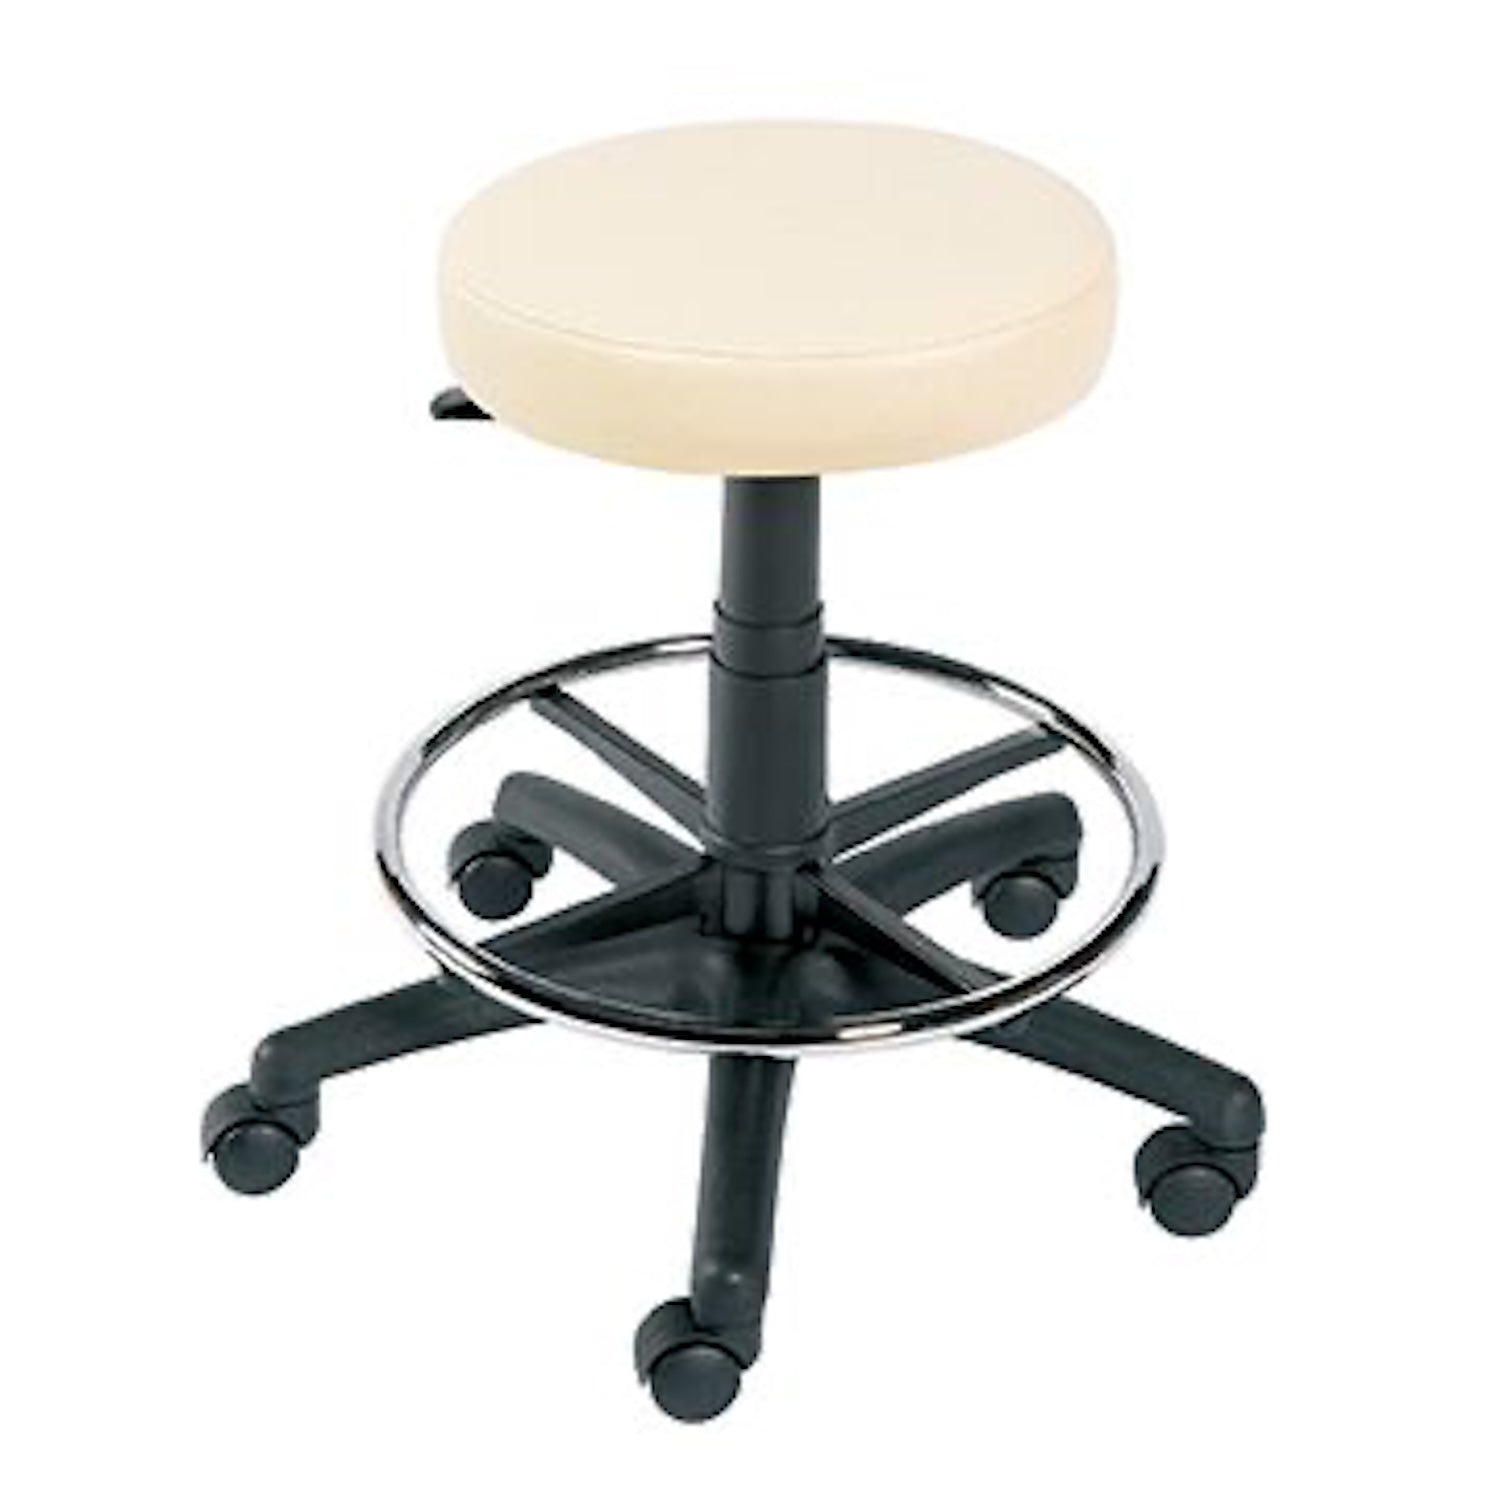 Sunflower Gas-lift Stool with Foot Ring & Sunflower Gas-lift Stool With Foot Ring in Black